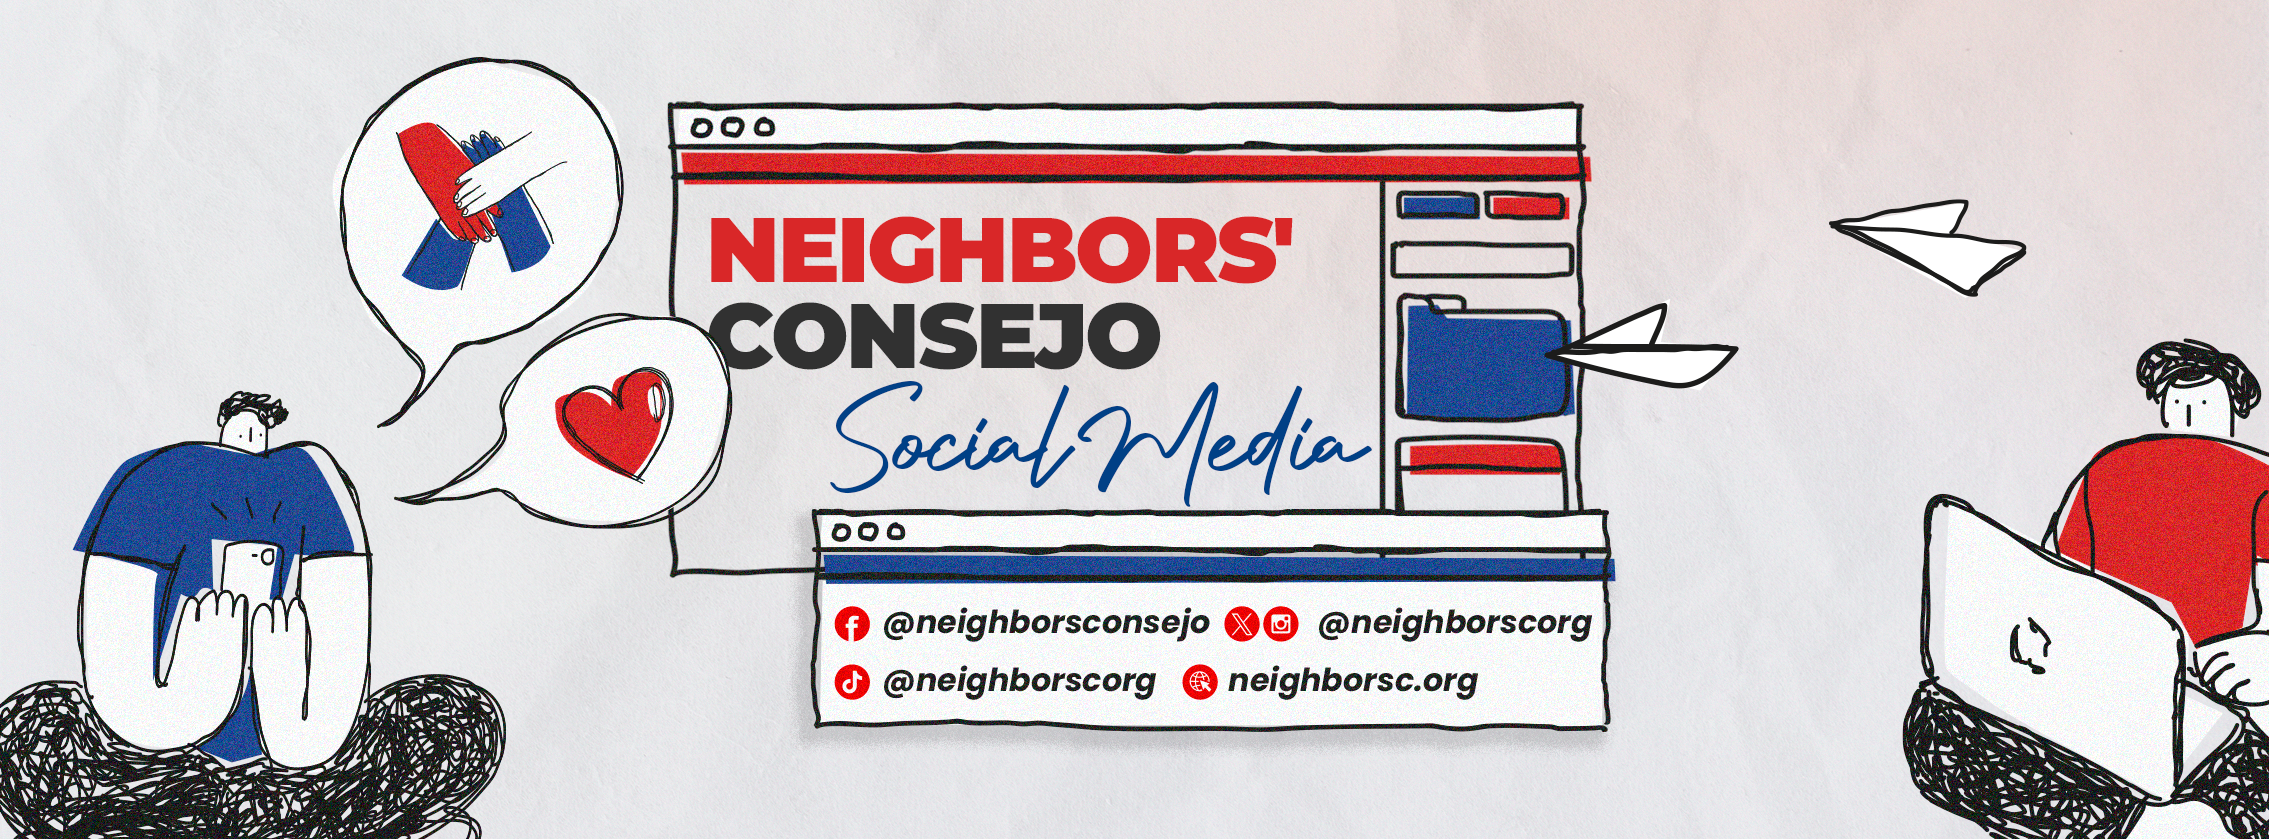 Neighbors' Consejo redes sociales eng